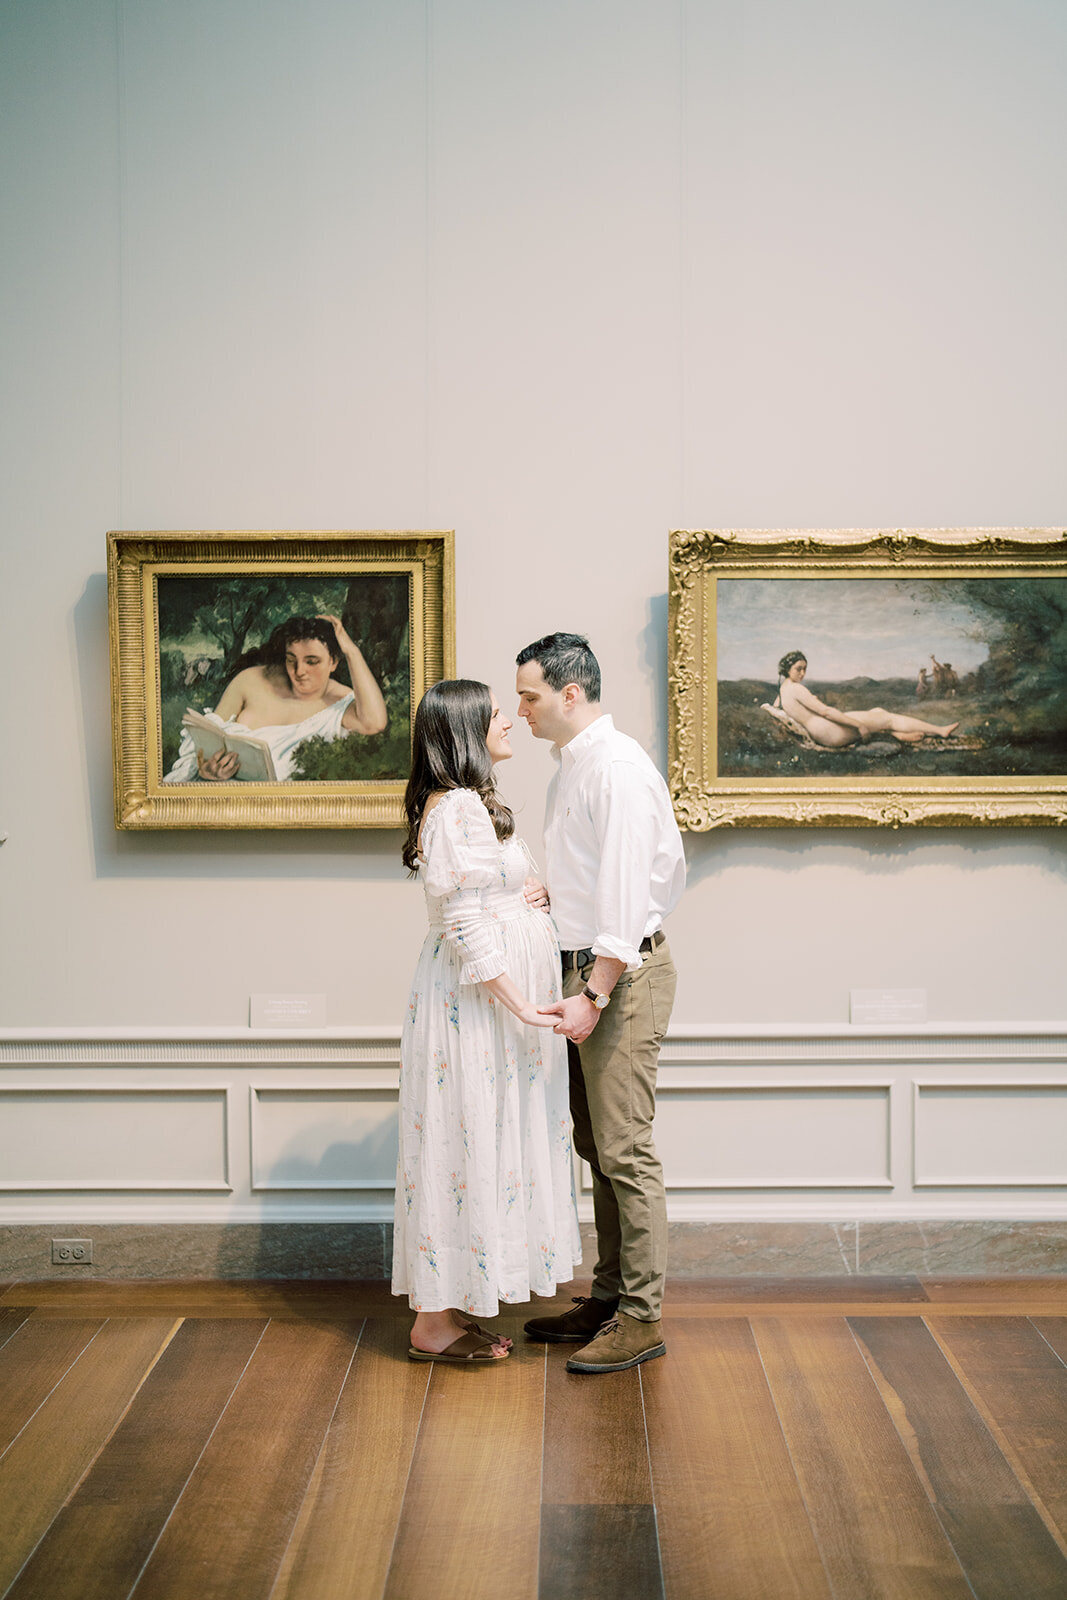 Pregnant mother stands holding her husband's hand and looking into each other's eyes in the National Gallery of Art.